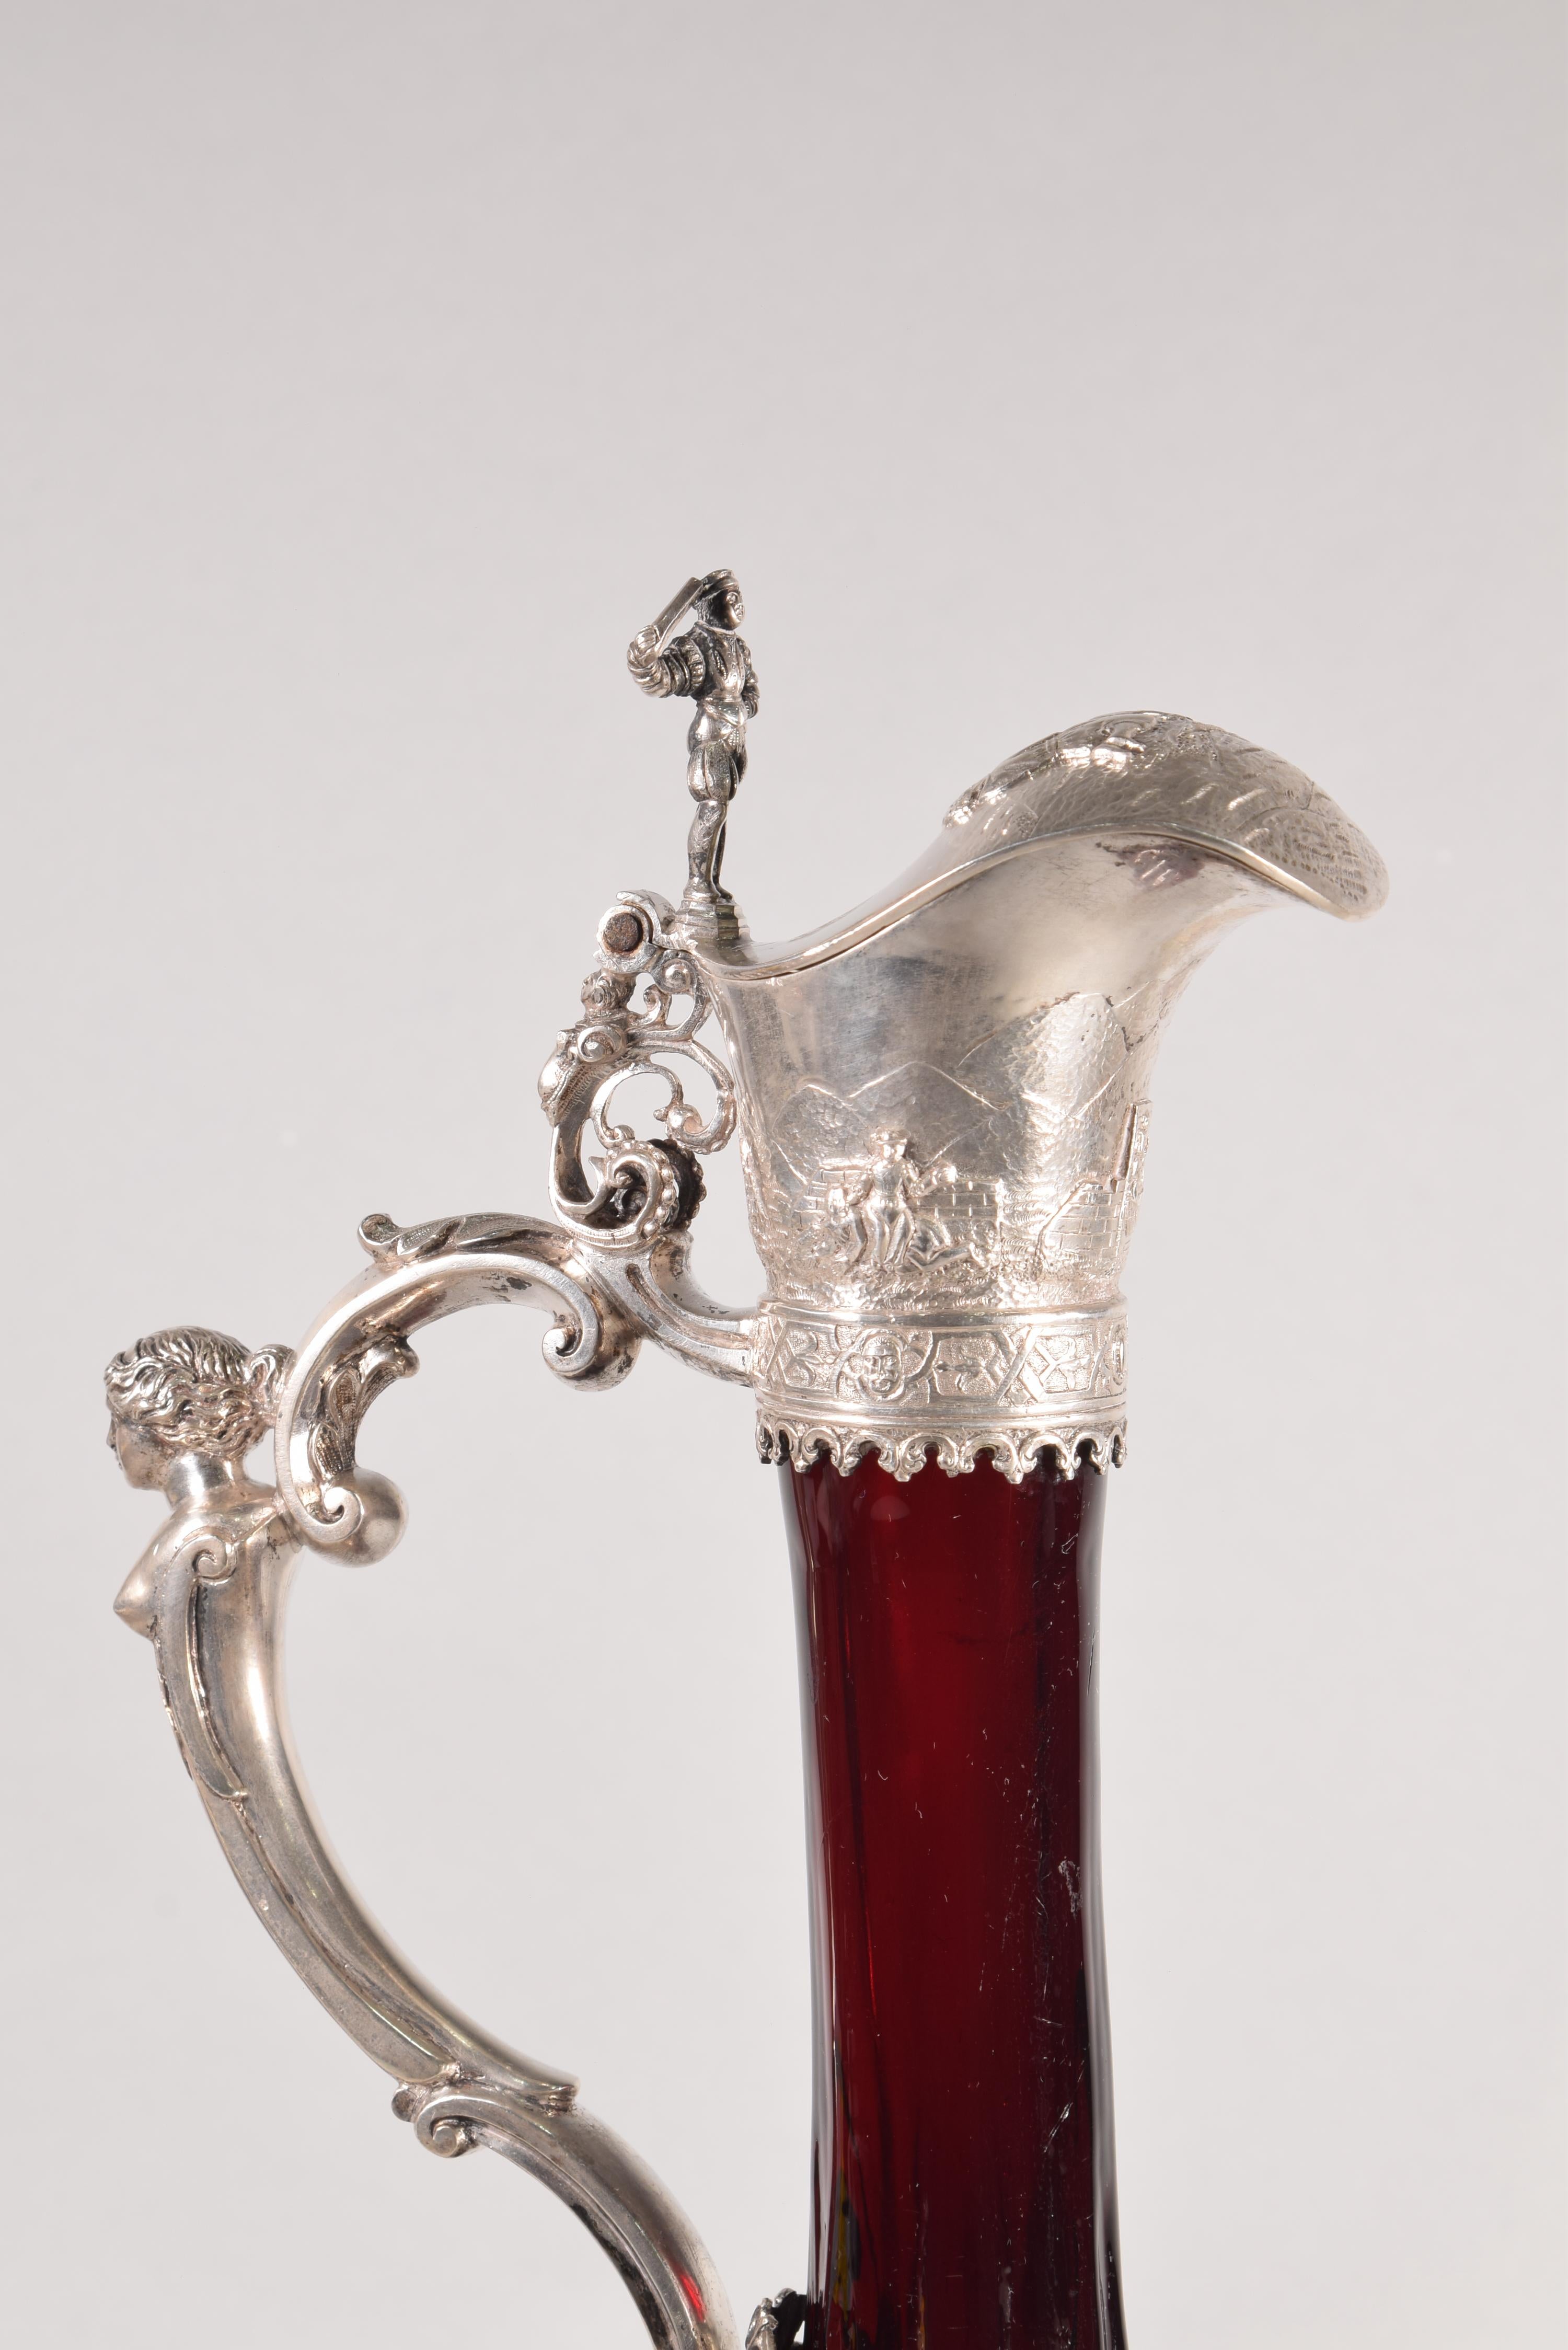 European Decanter, Glass, Silver, Possibly Germany, 19th Century